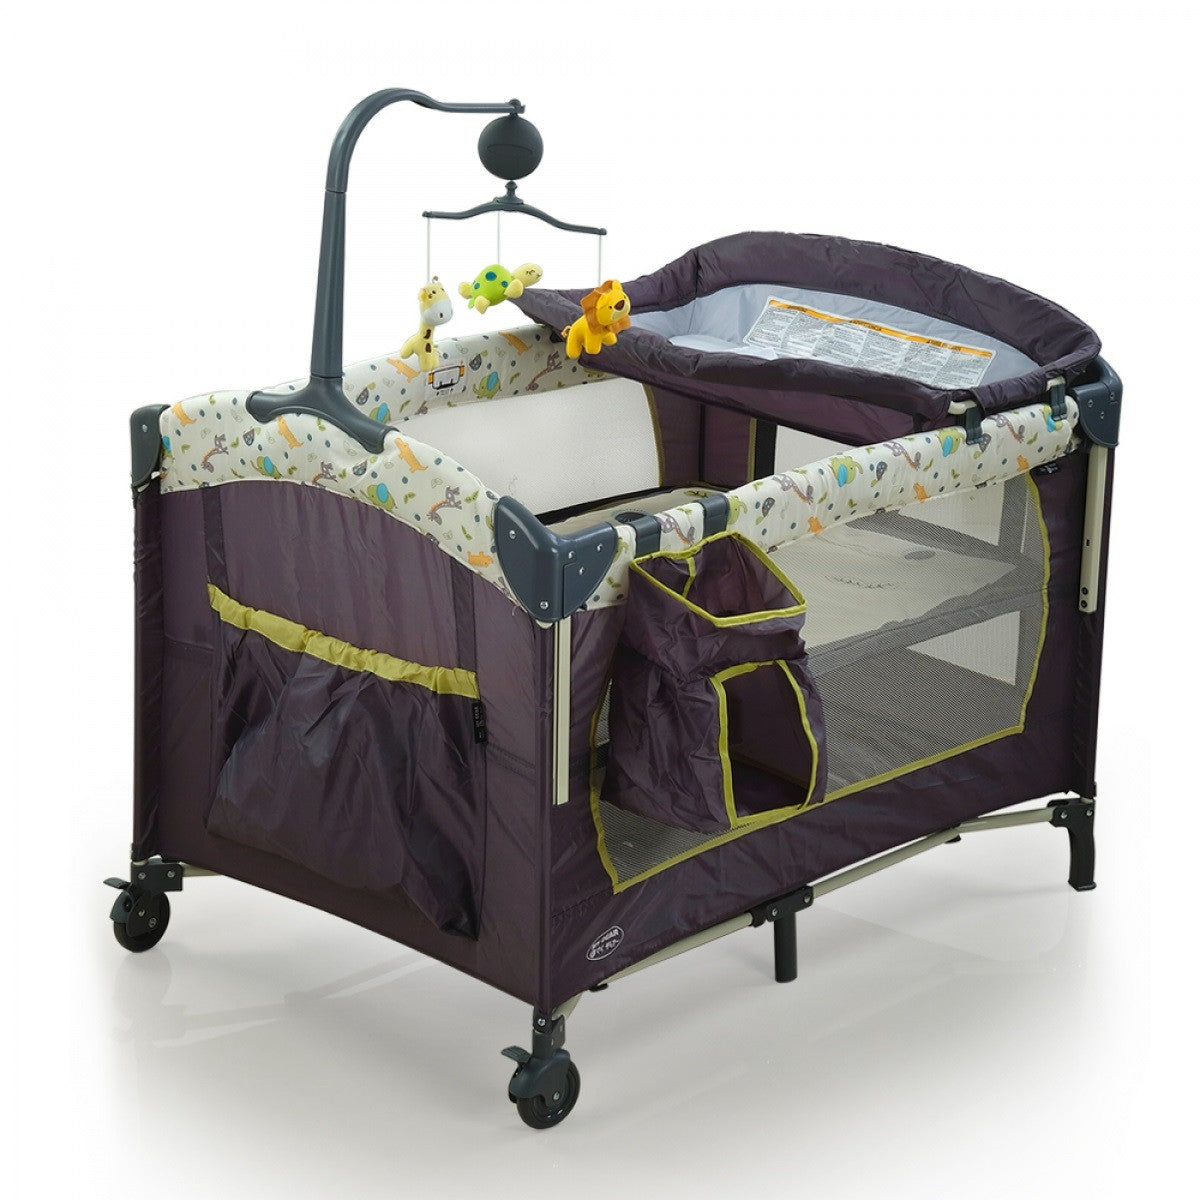 My Dear Baby Playpen 26022 With Side Slide Door, Musical Toys Bar, Diaper Changer, Diaper Stacker and Travel Carry Bag